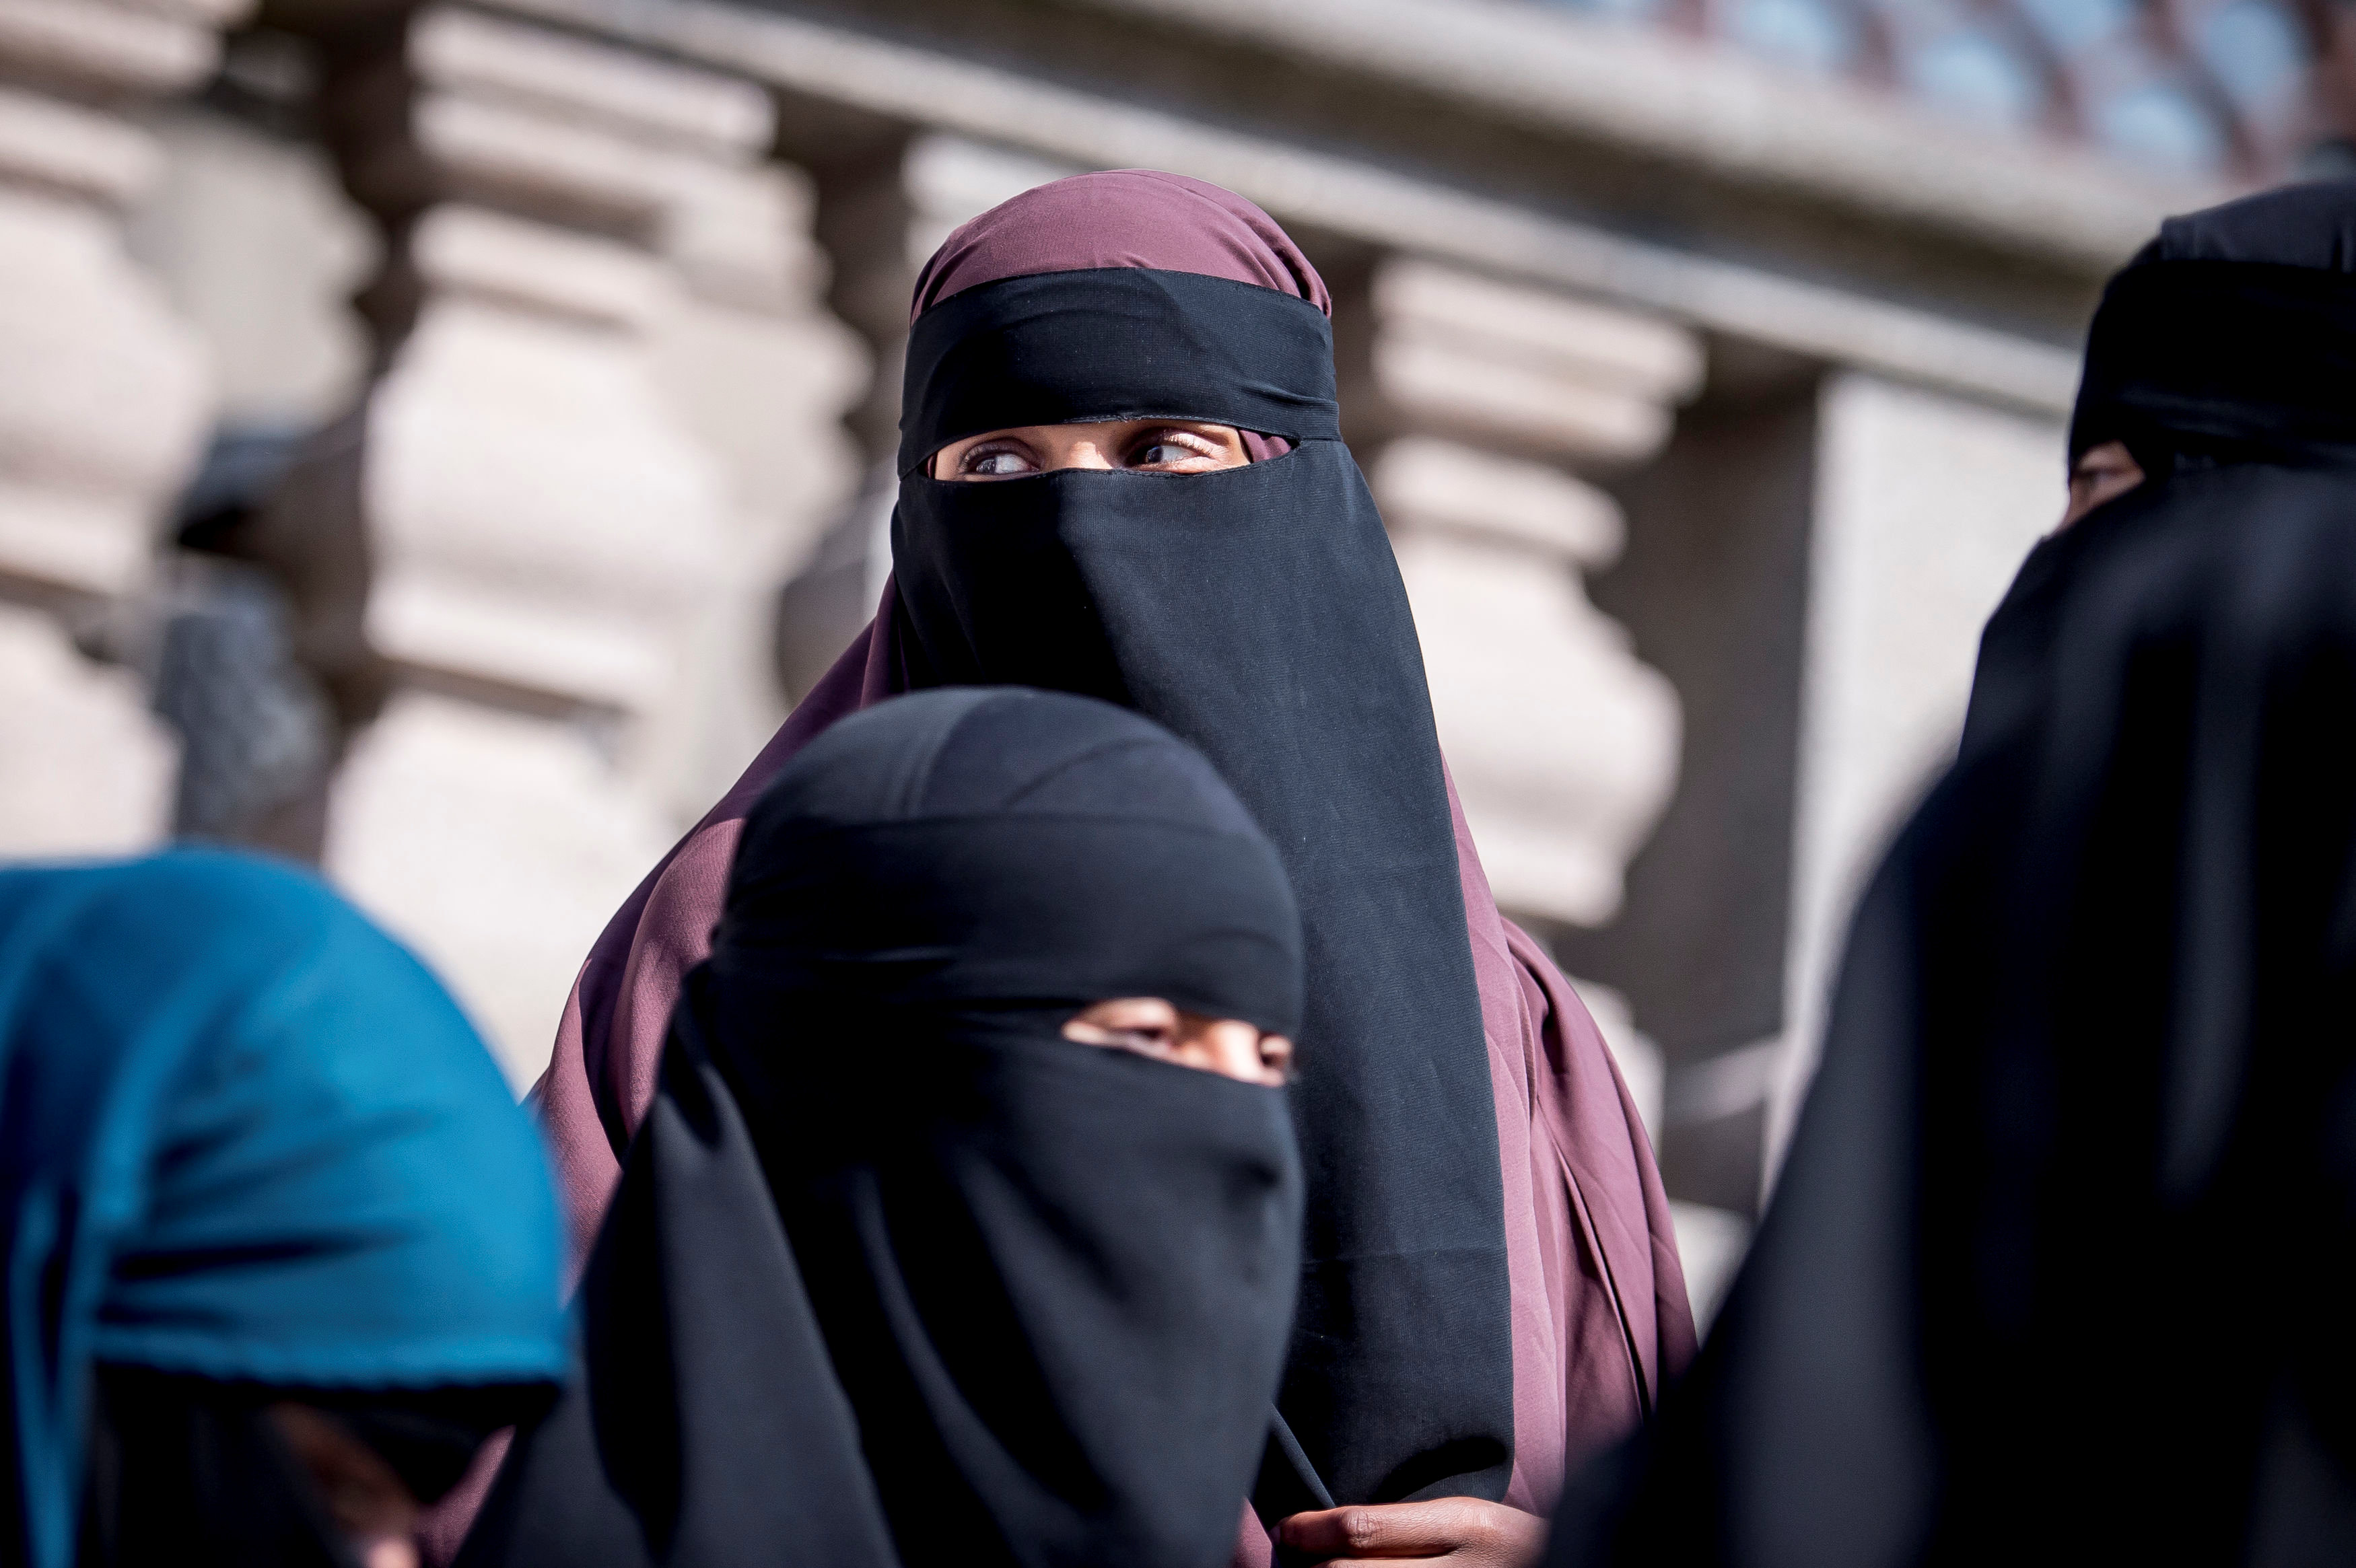 Danish parliament bans the wearing of face veils in public